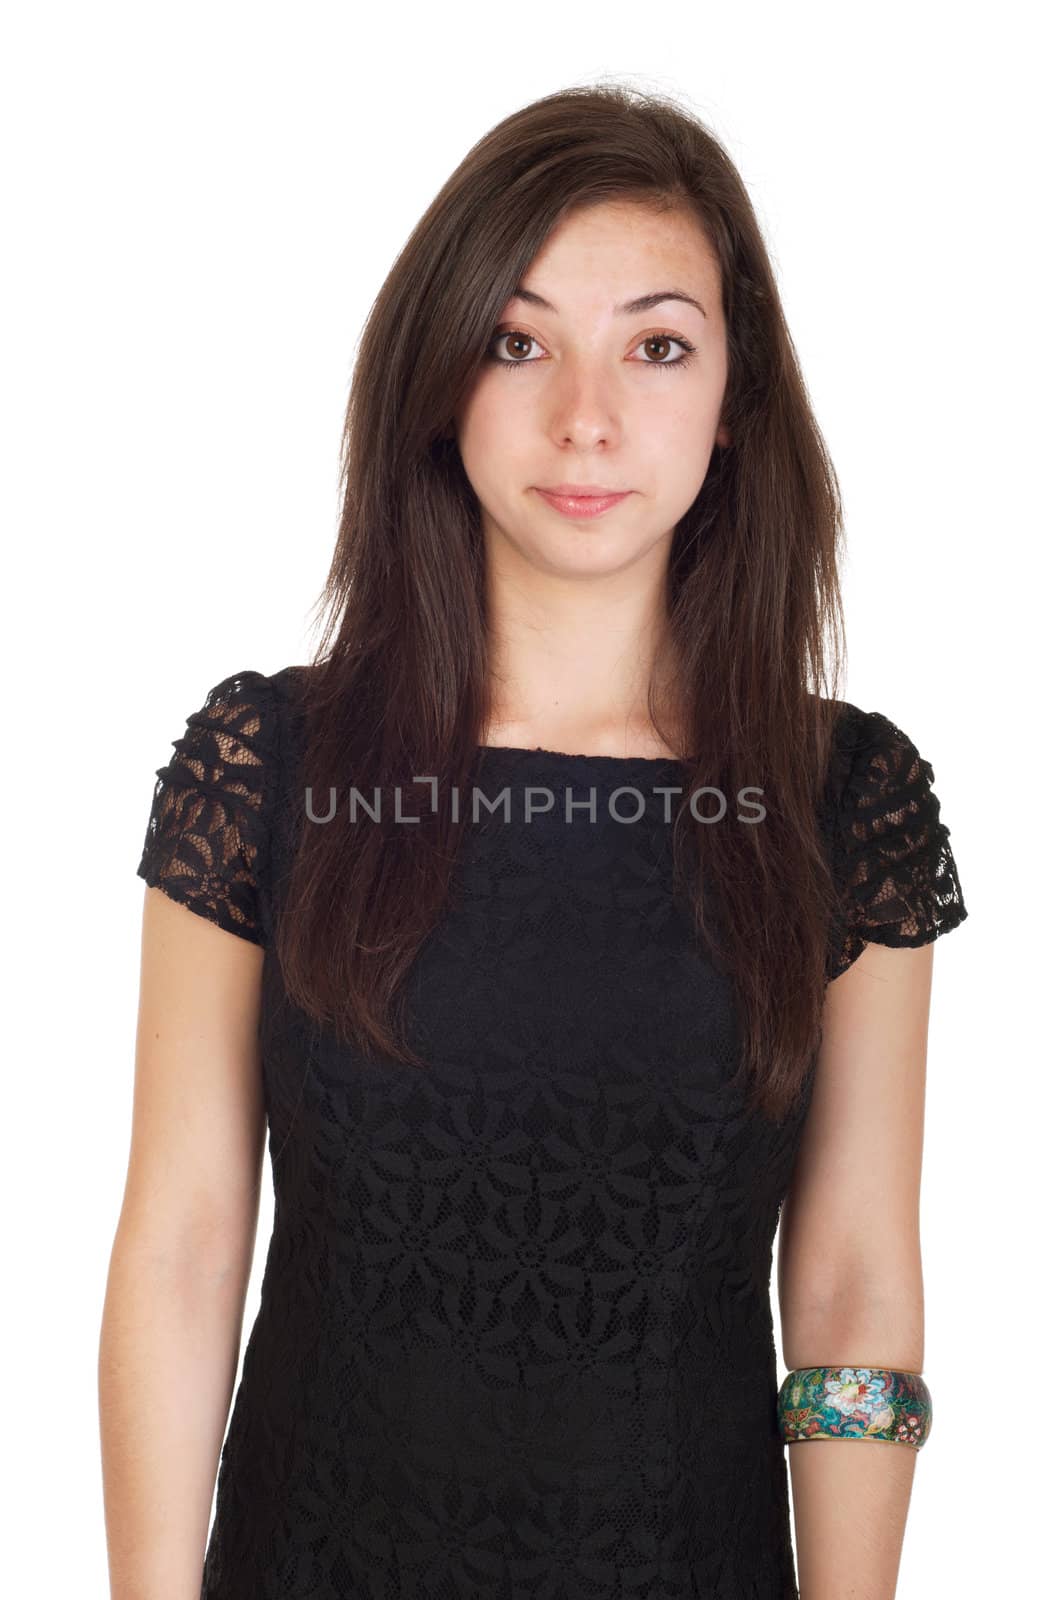 serious 18 years old young woman in black dress ready for night out (isolated on white background)